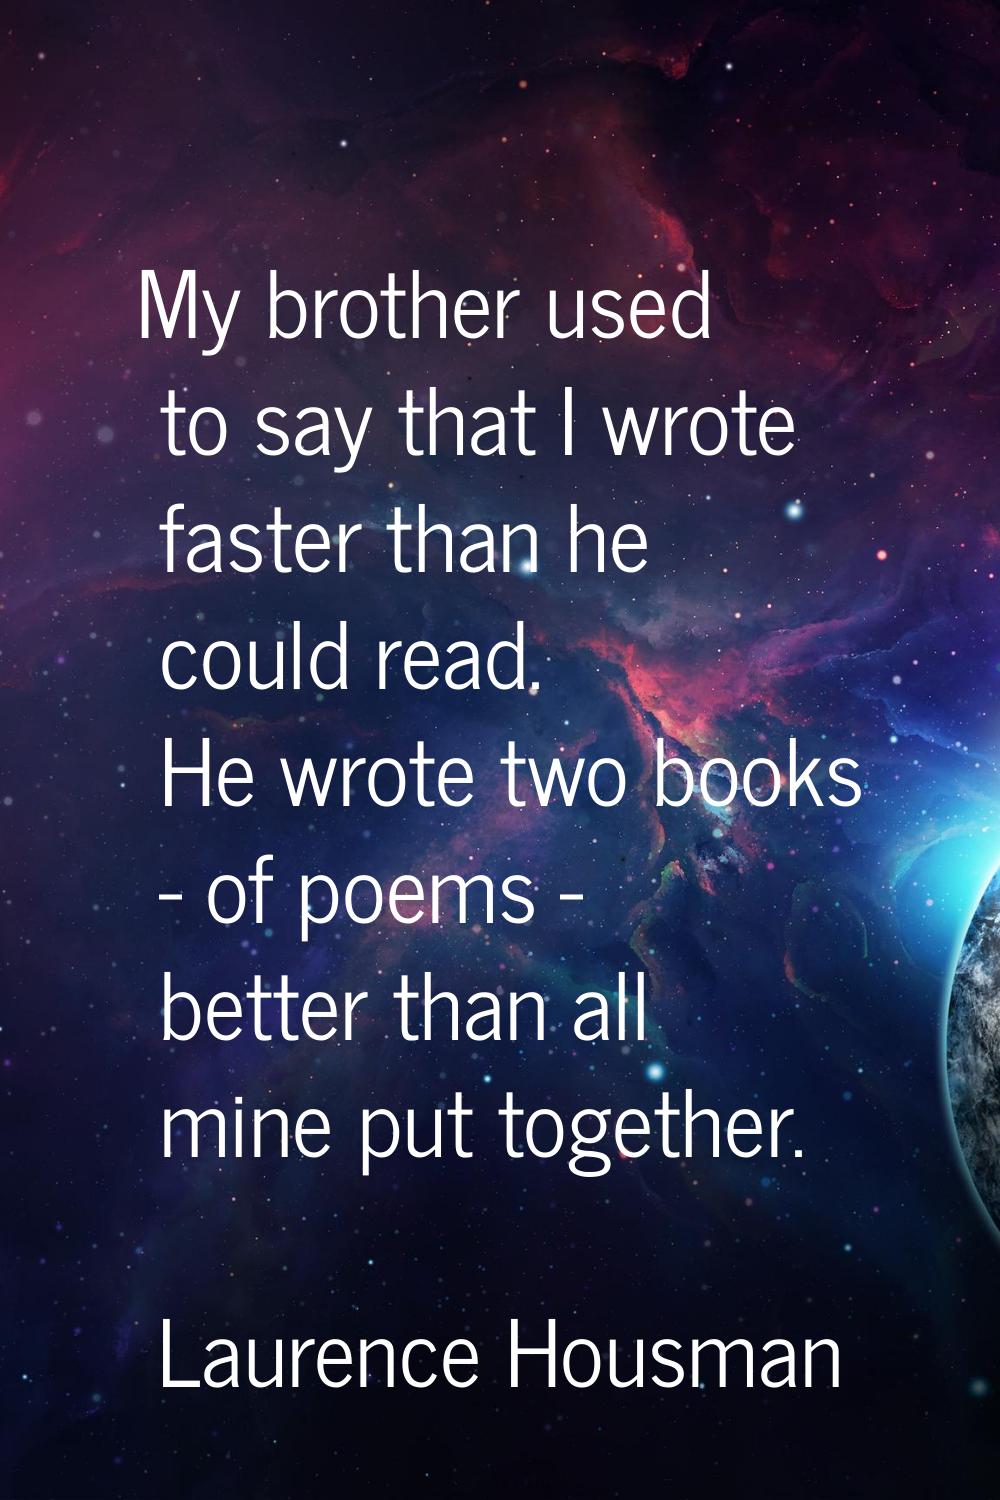 My brother used to say that I wrote faster than he could read. He wrote two books - of poems - bett